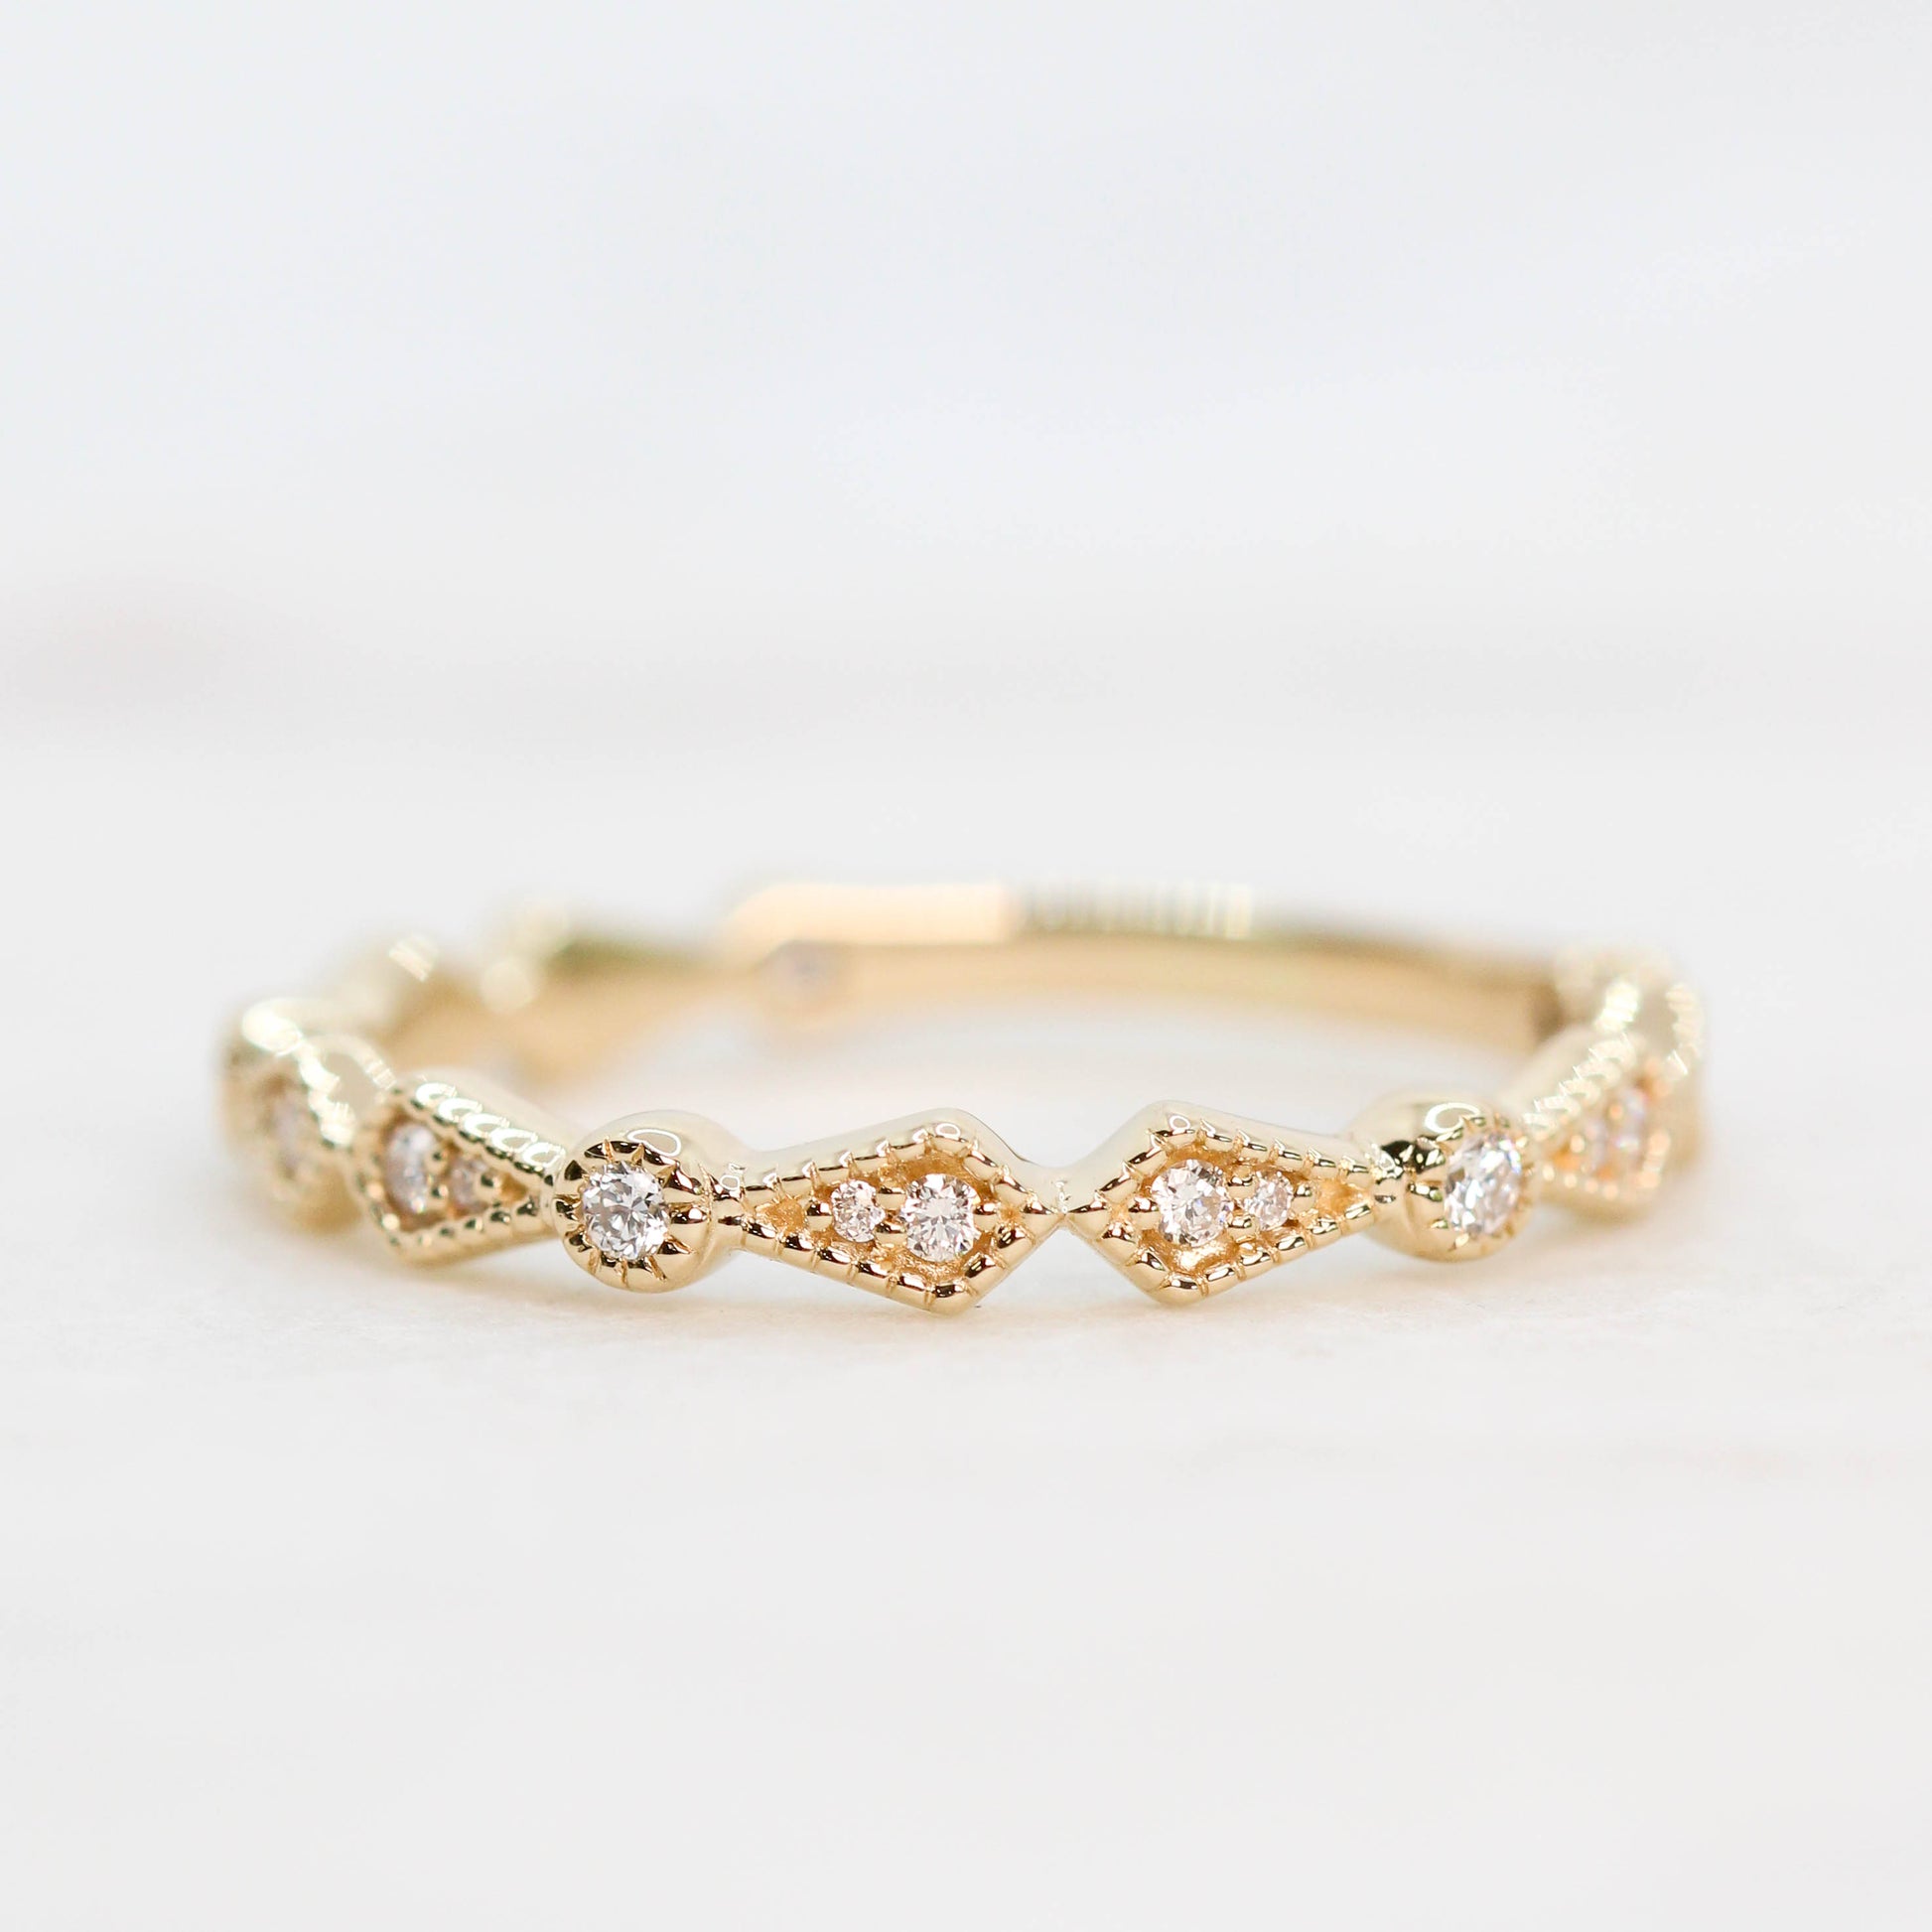 Evelyn - Stackable Wedding Band in Your Choice of Gold - Midwinter Co. Alternative Bridal Rings and Modern Fine Jewelry